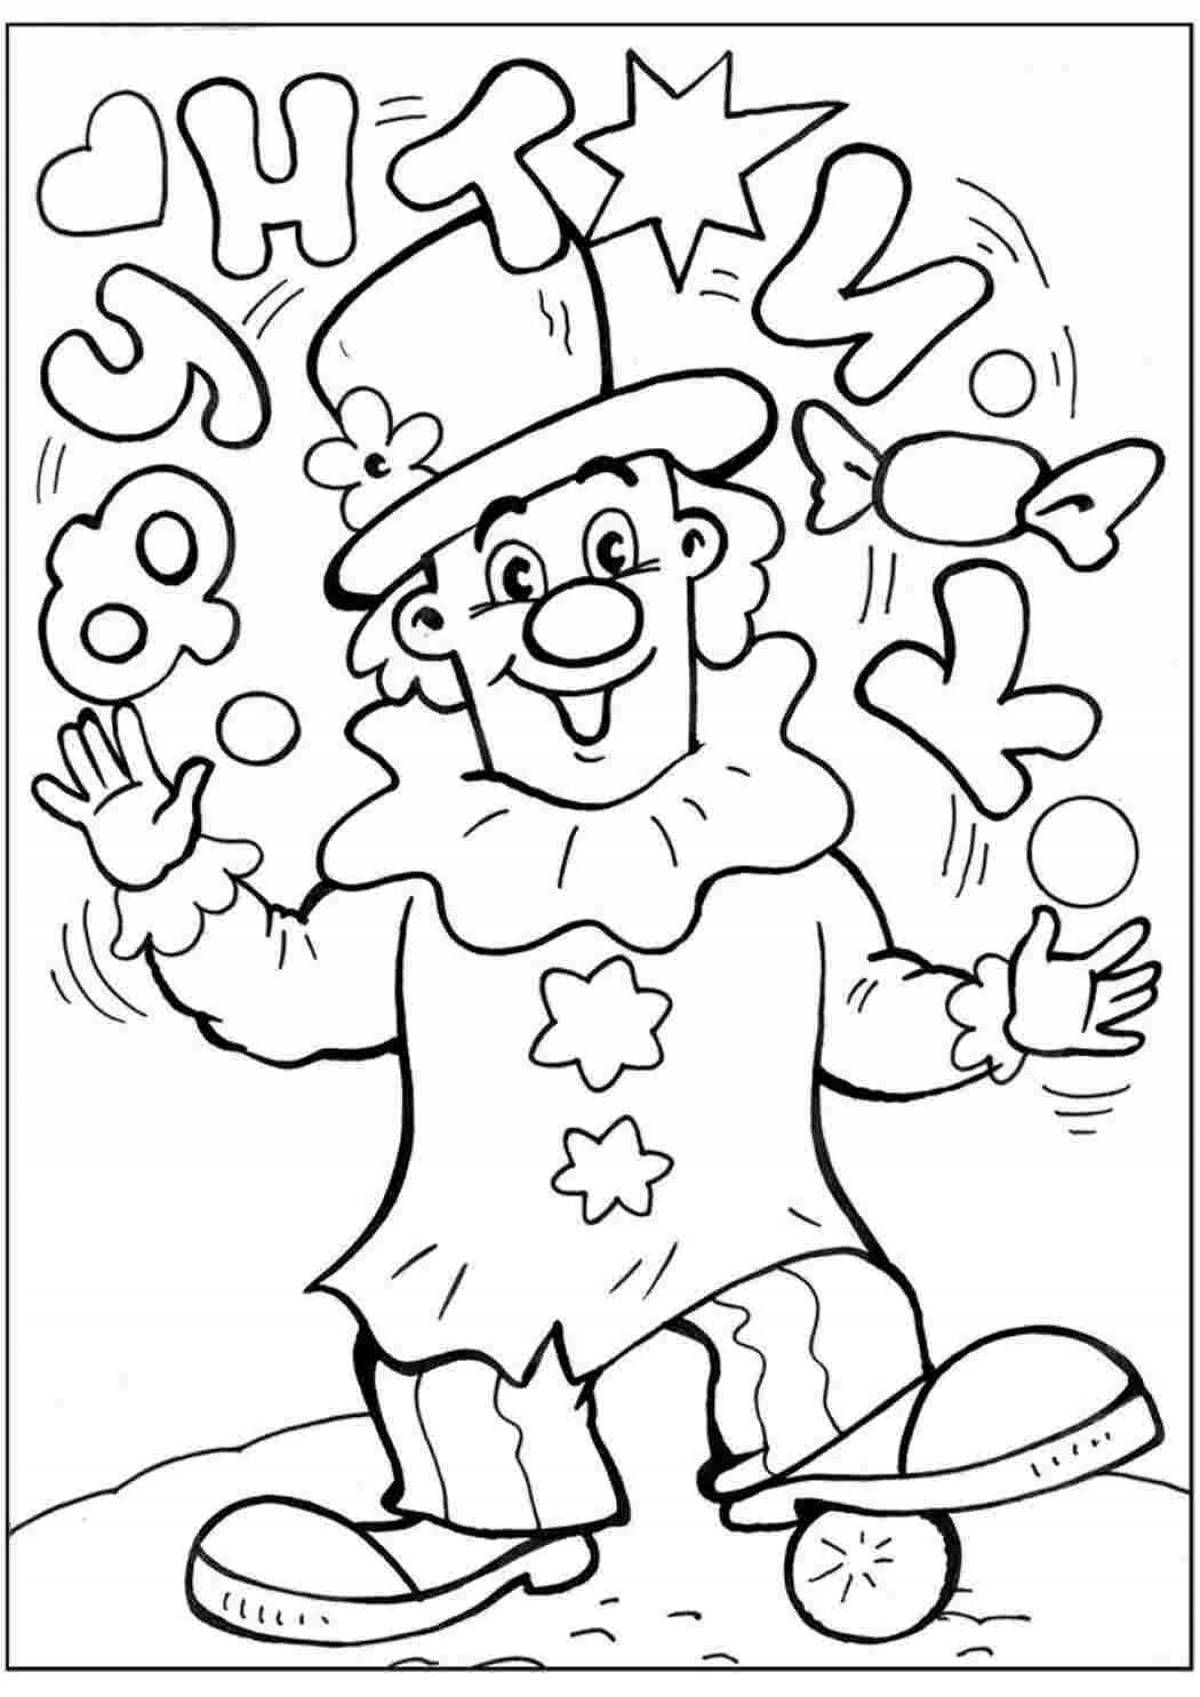 Funky uncle mokus fascinating coloring book